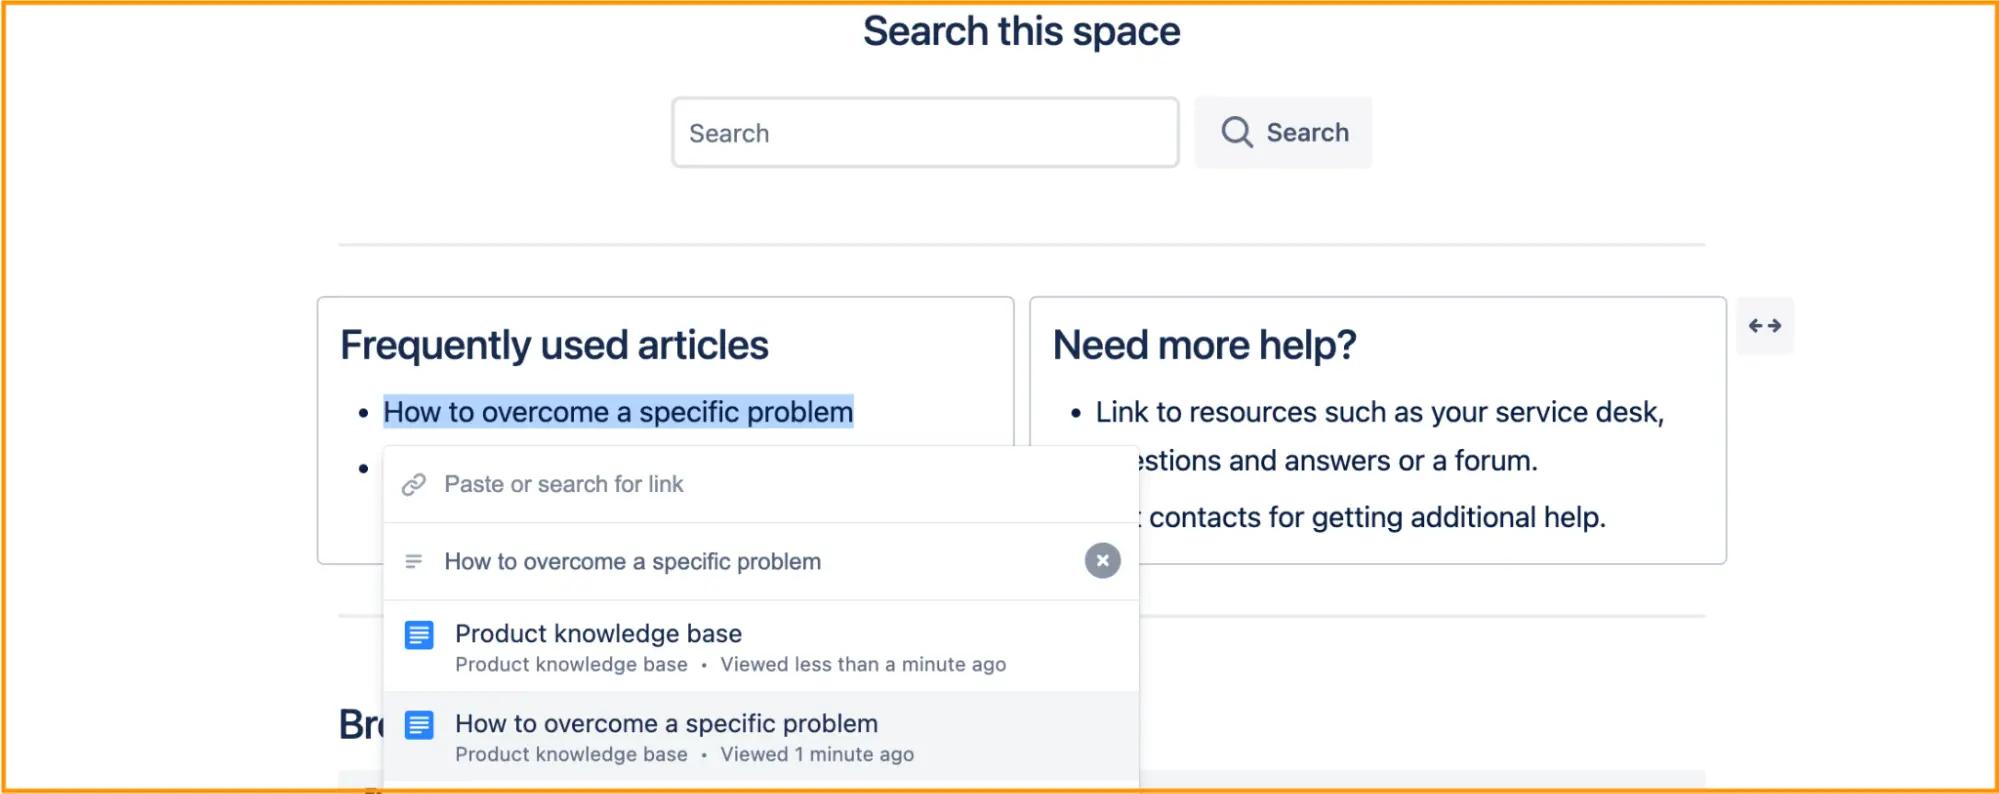 A screenshot of a Confluence space with a list of popular articles